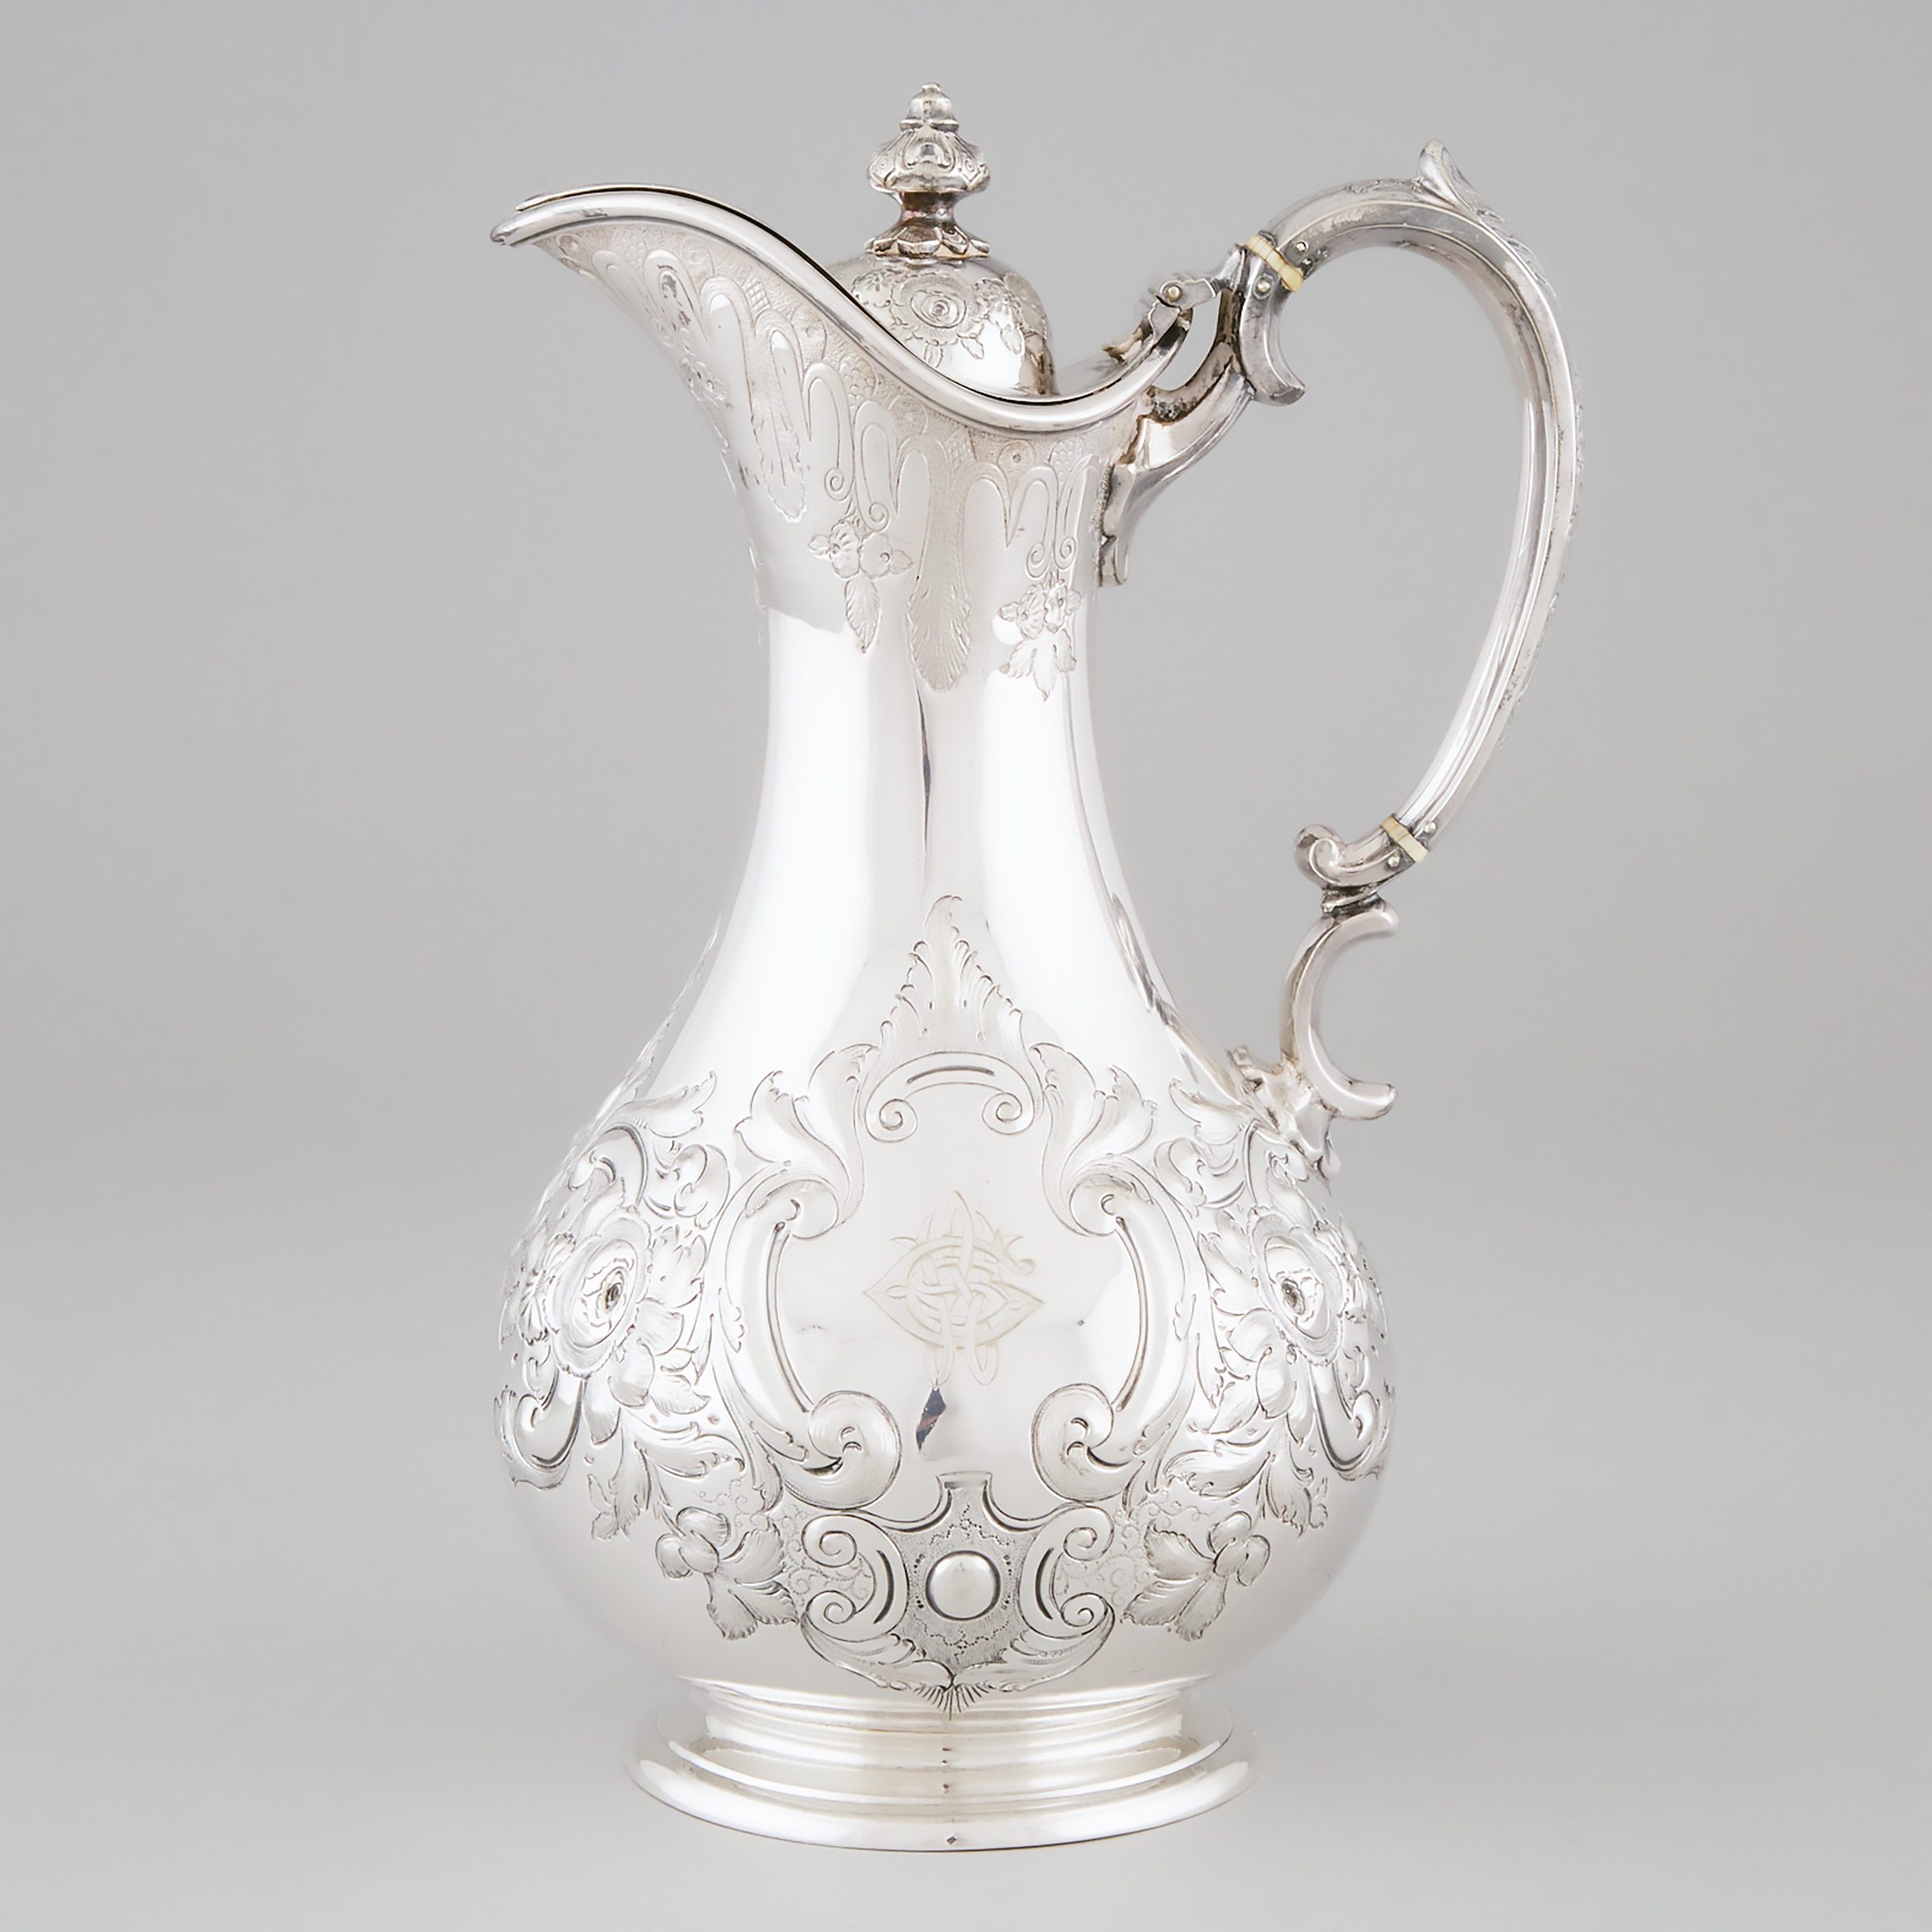 Victorian Silver Plated Lidded Jug, Martin, Hall & Co., late 19th century